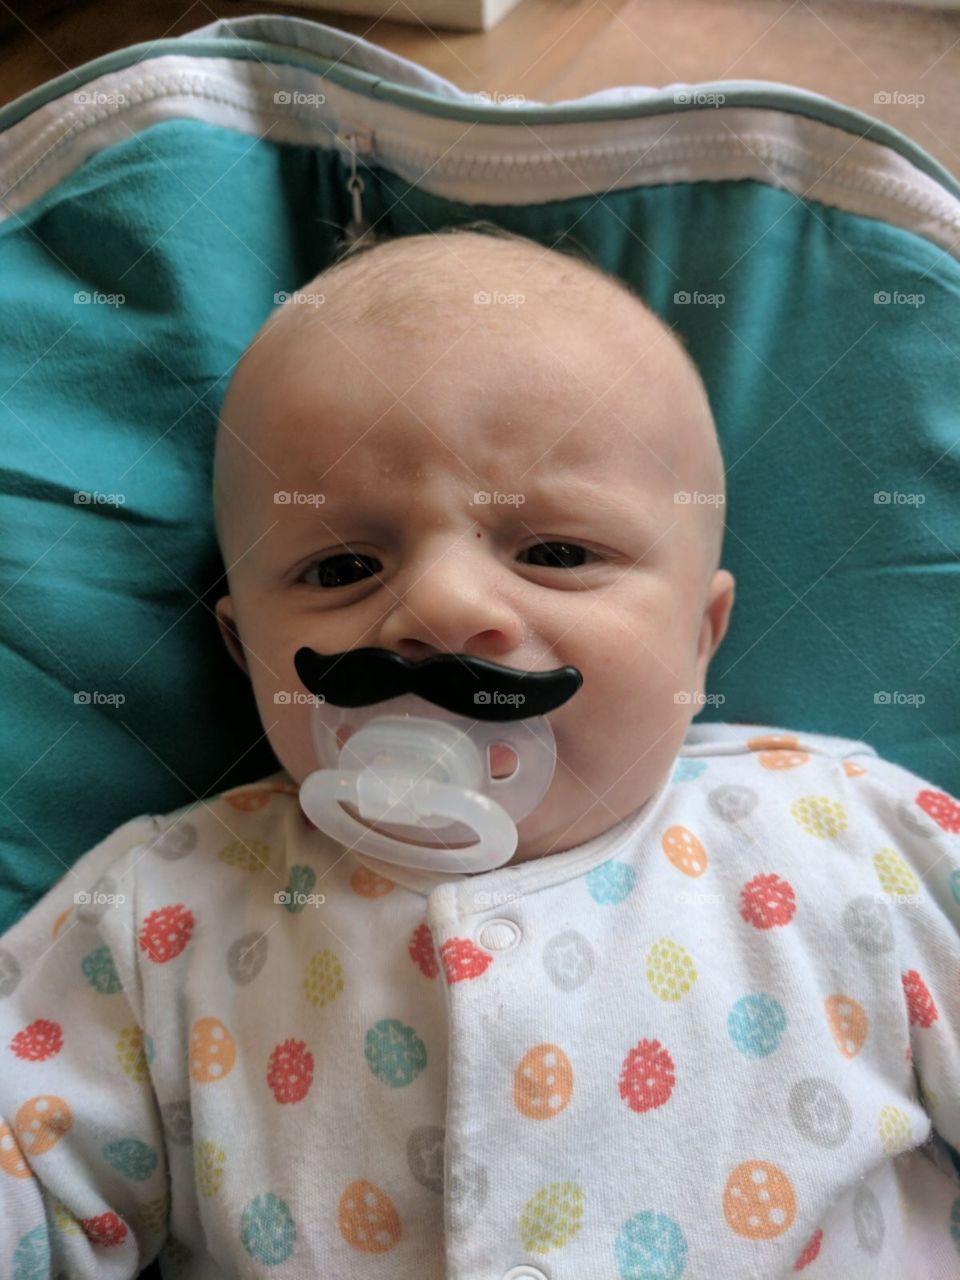 Baby Oliver angry with a moustache